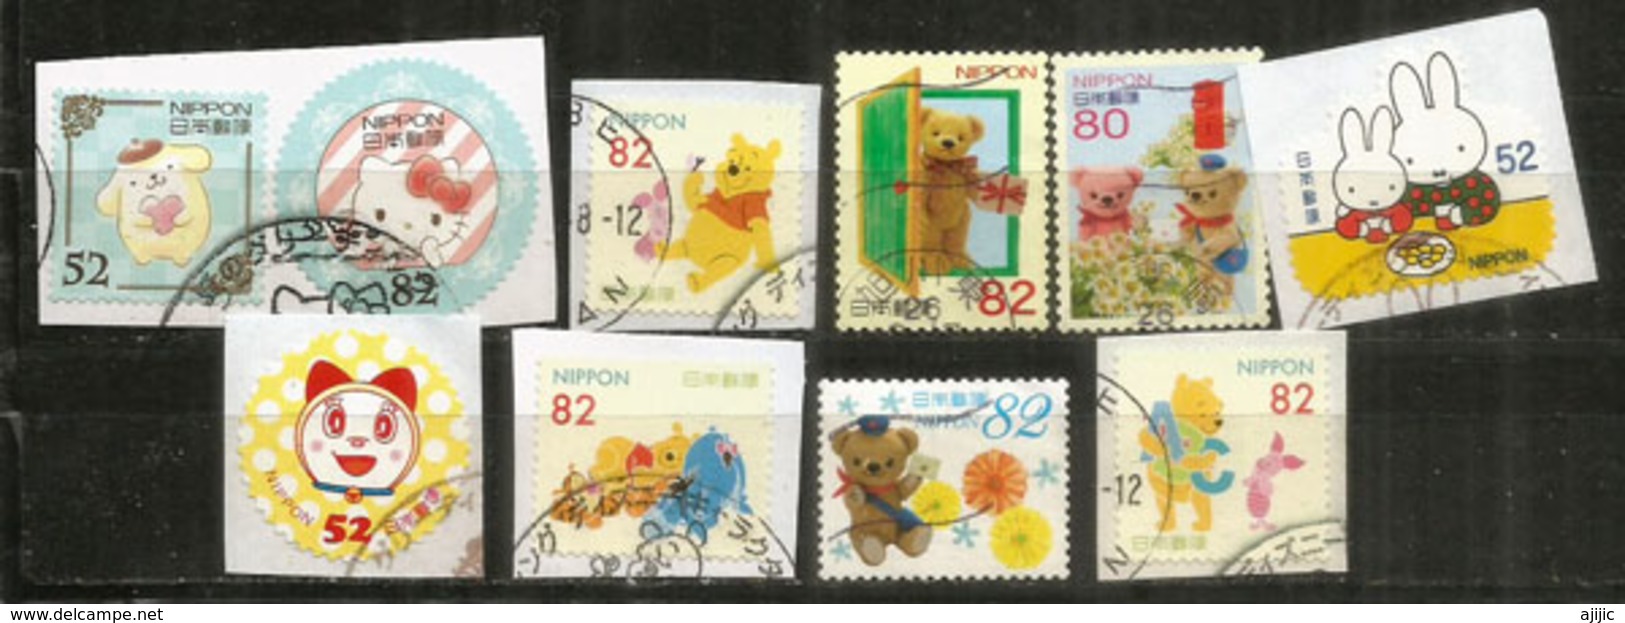 Cute Japanese Cartoon Characters, Fine Used Japanese Stamps From My Mail. - Disney